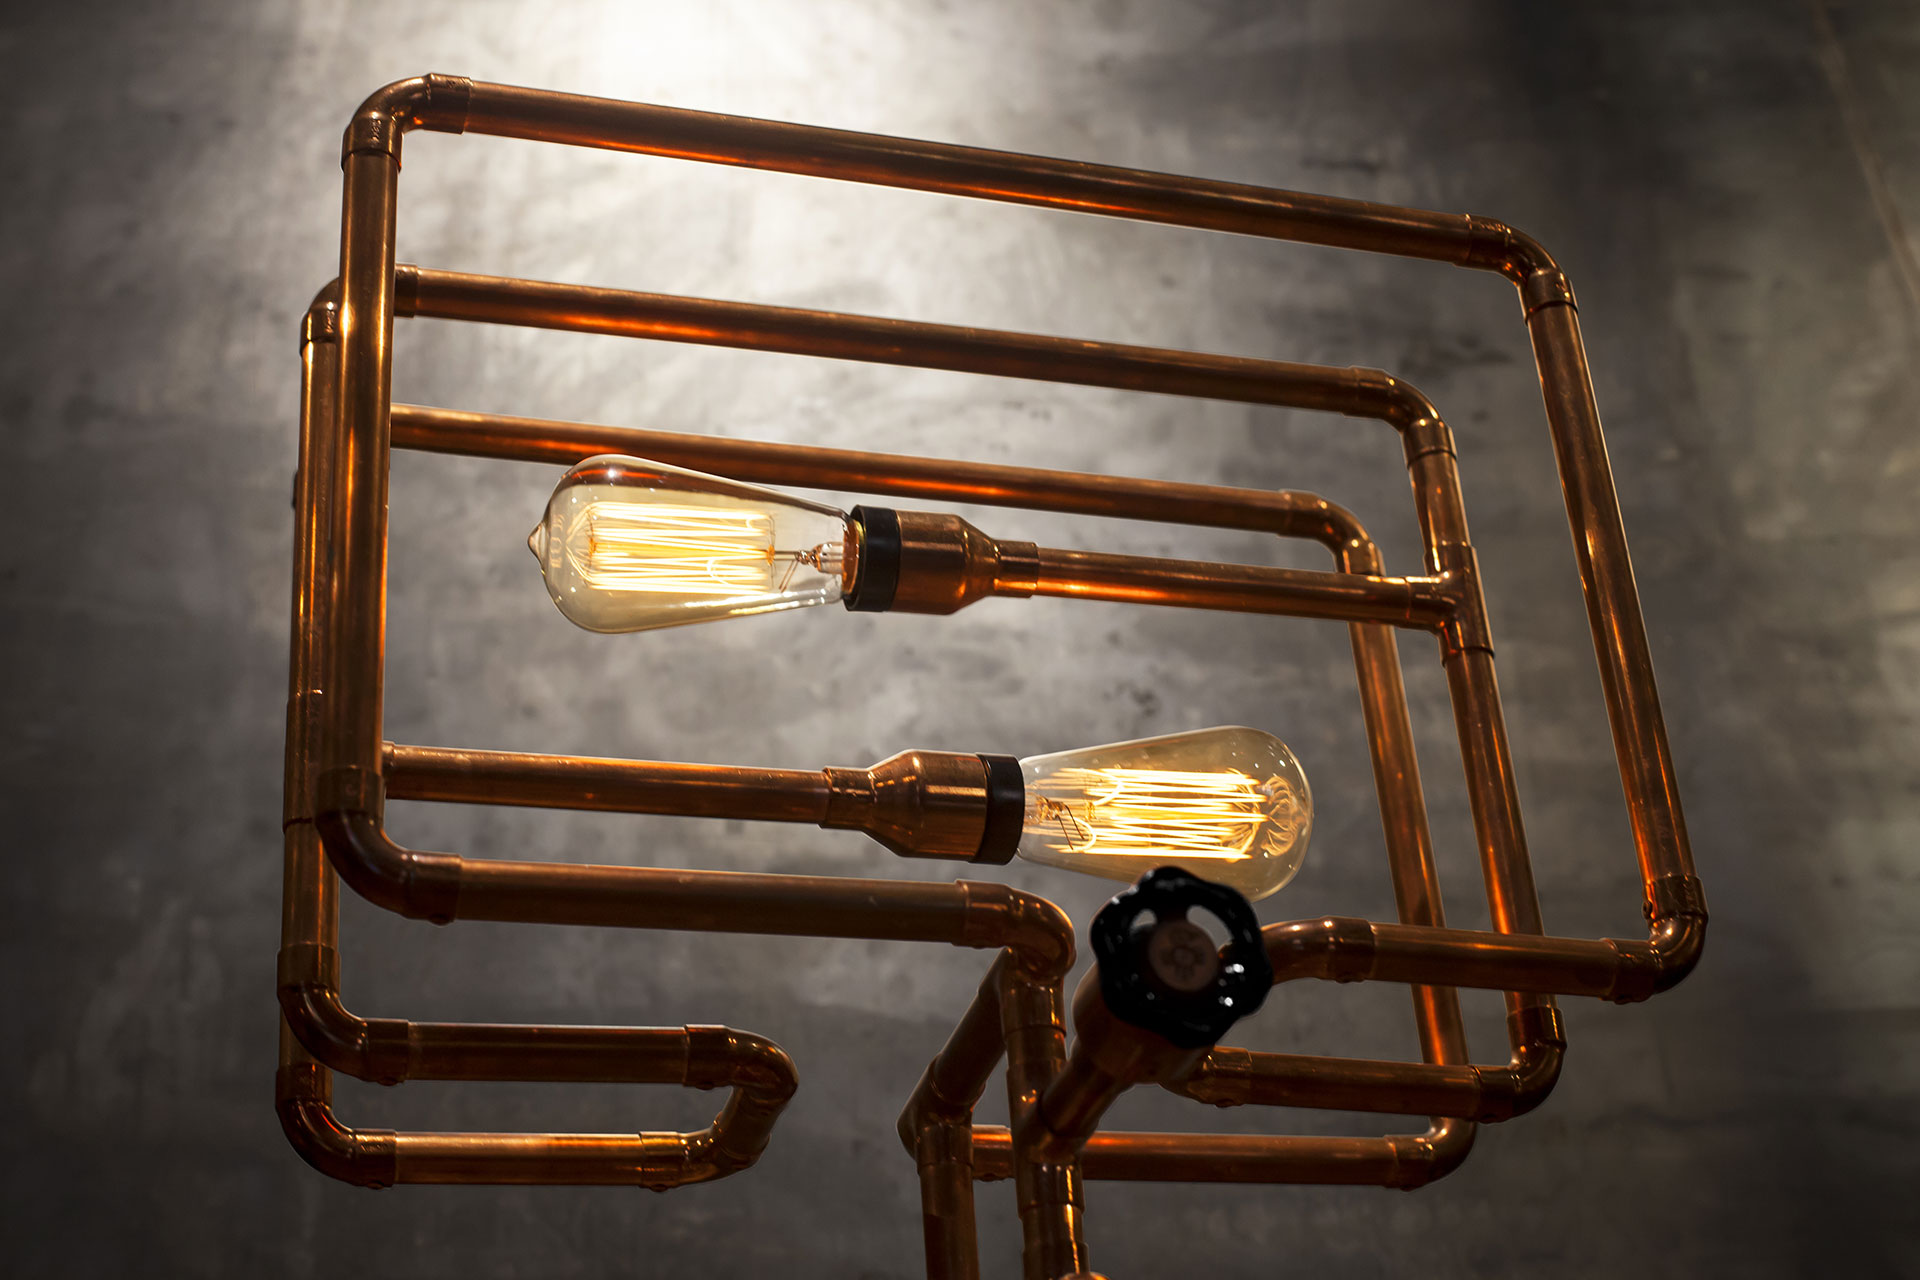 Copper tubing conosle lamp with knob dimmer and vintage Edison bulbs